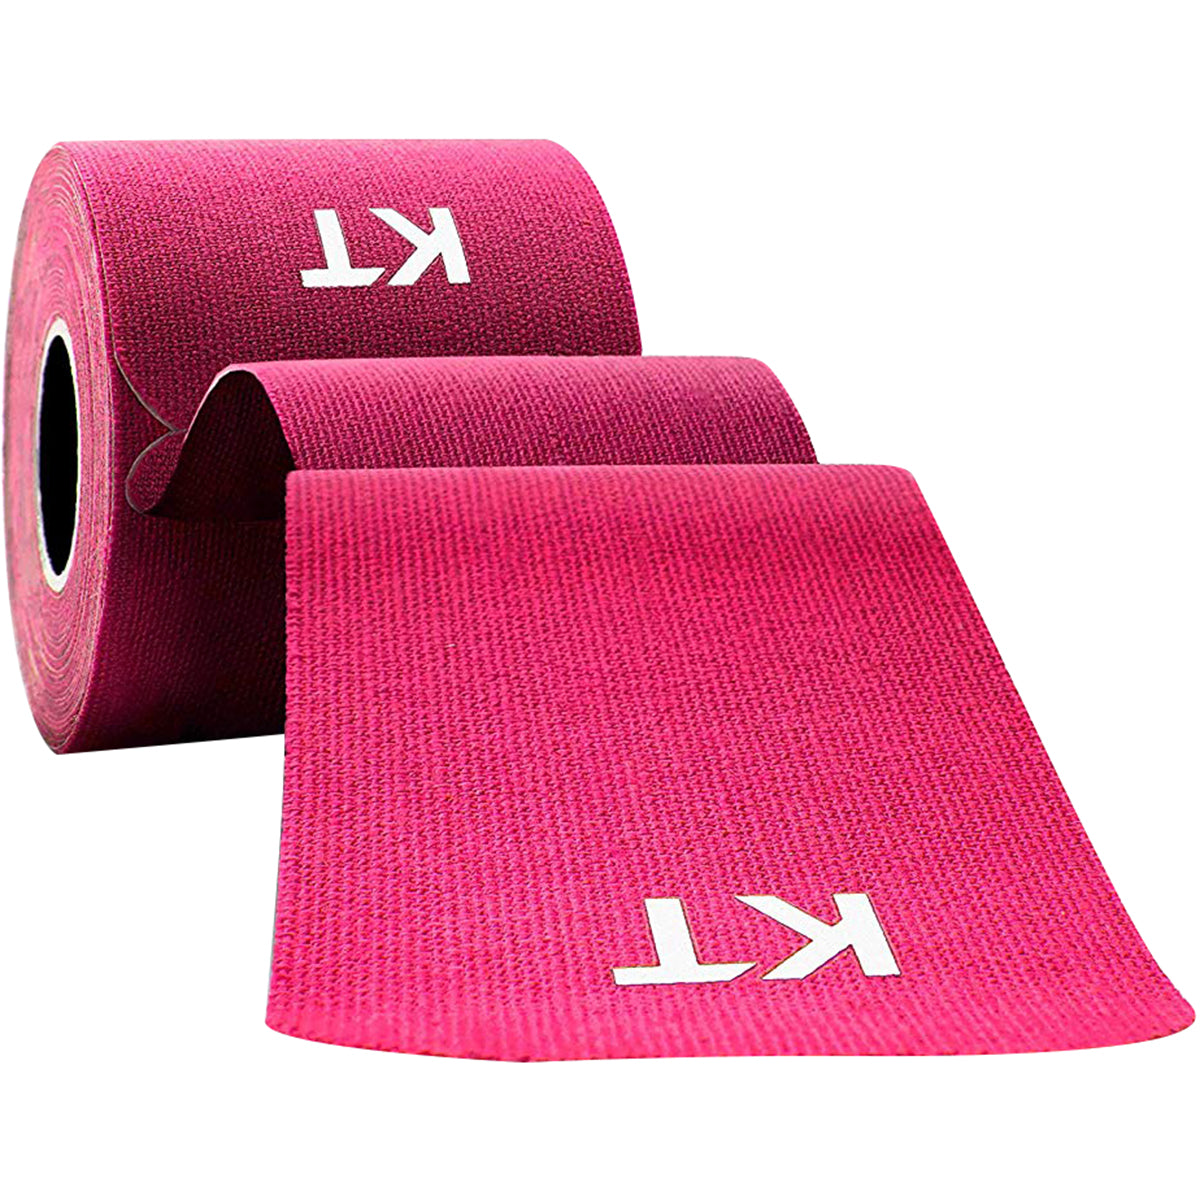 KT Tape Cotton 10" Precut Kinesiology Therapeutic Sports Roll, 20 Strips, Pink KT Tape